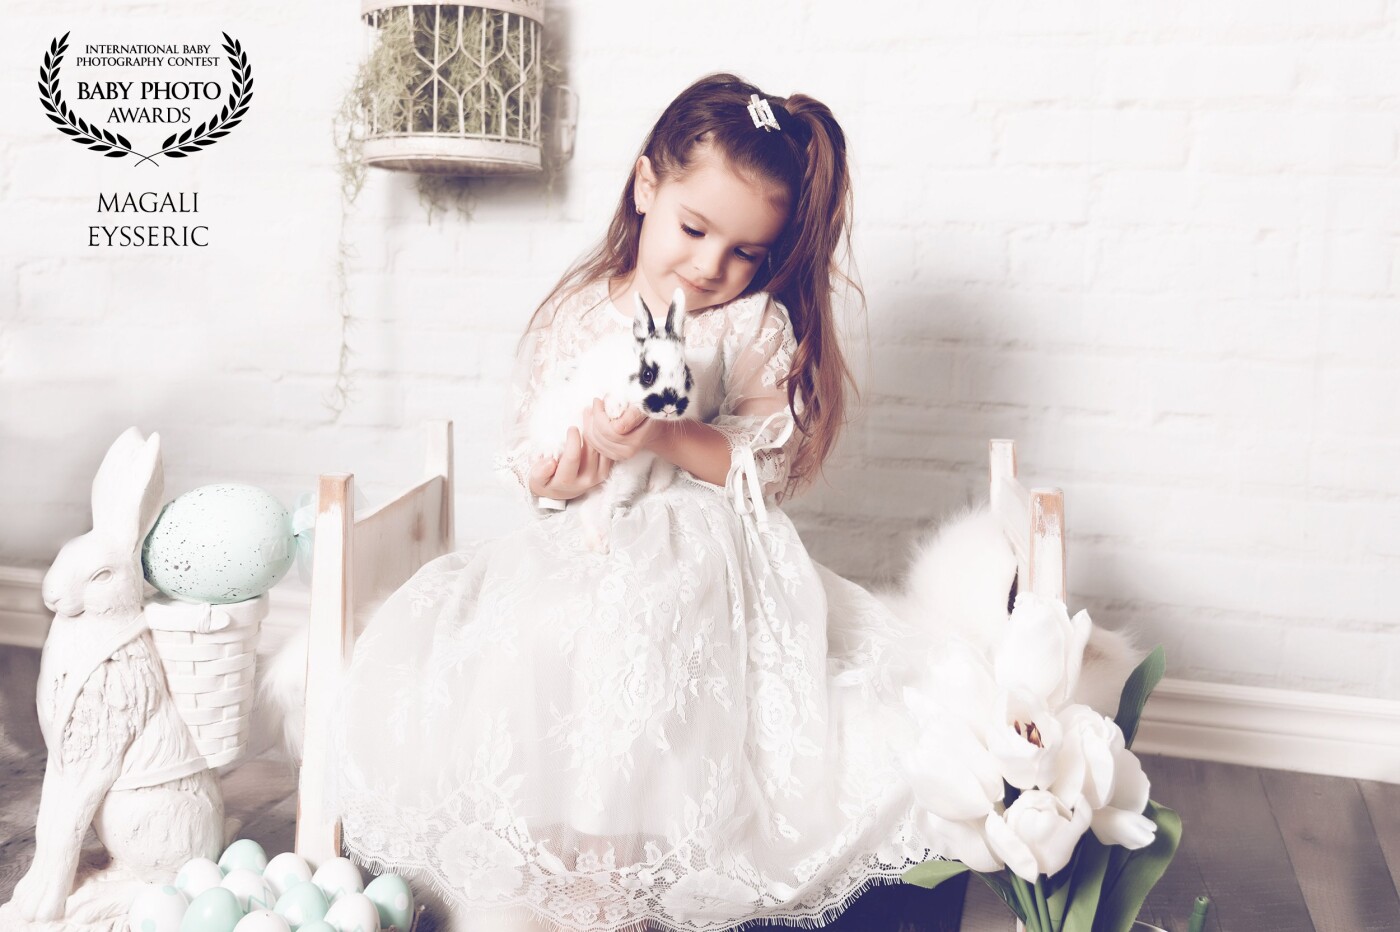 The mini easter sessions are very funny with the little rabbit children adores them. The little princesses are always beautiful!!